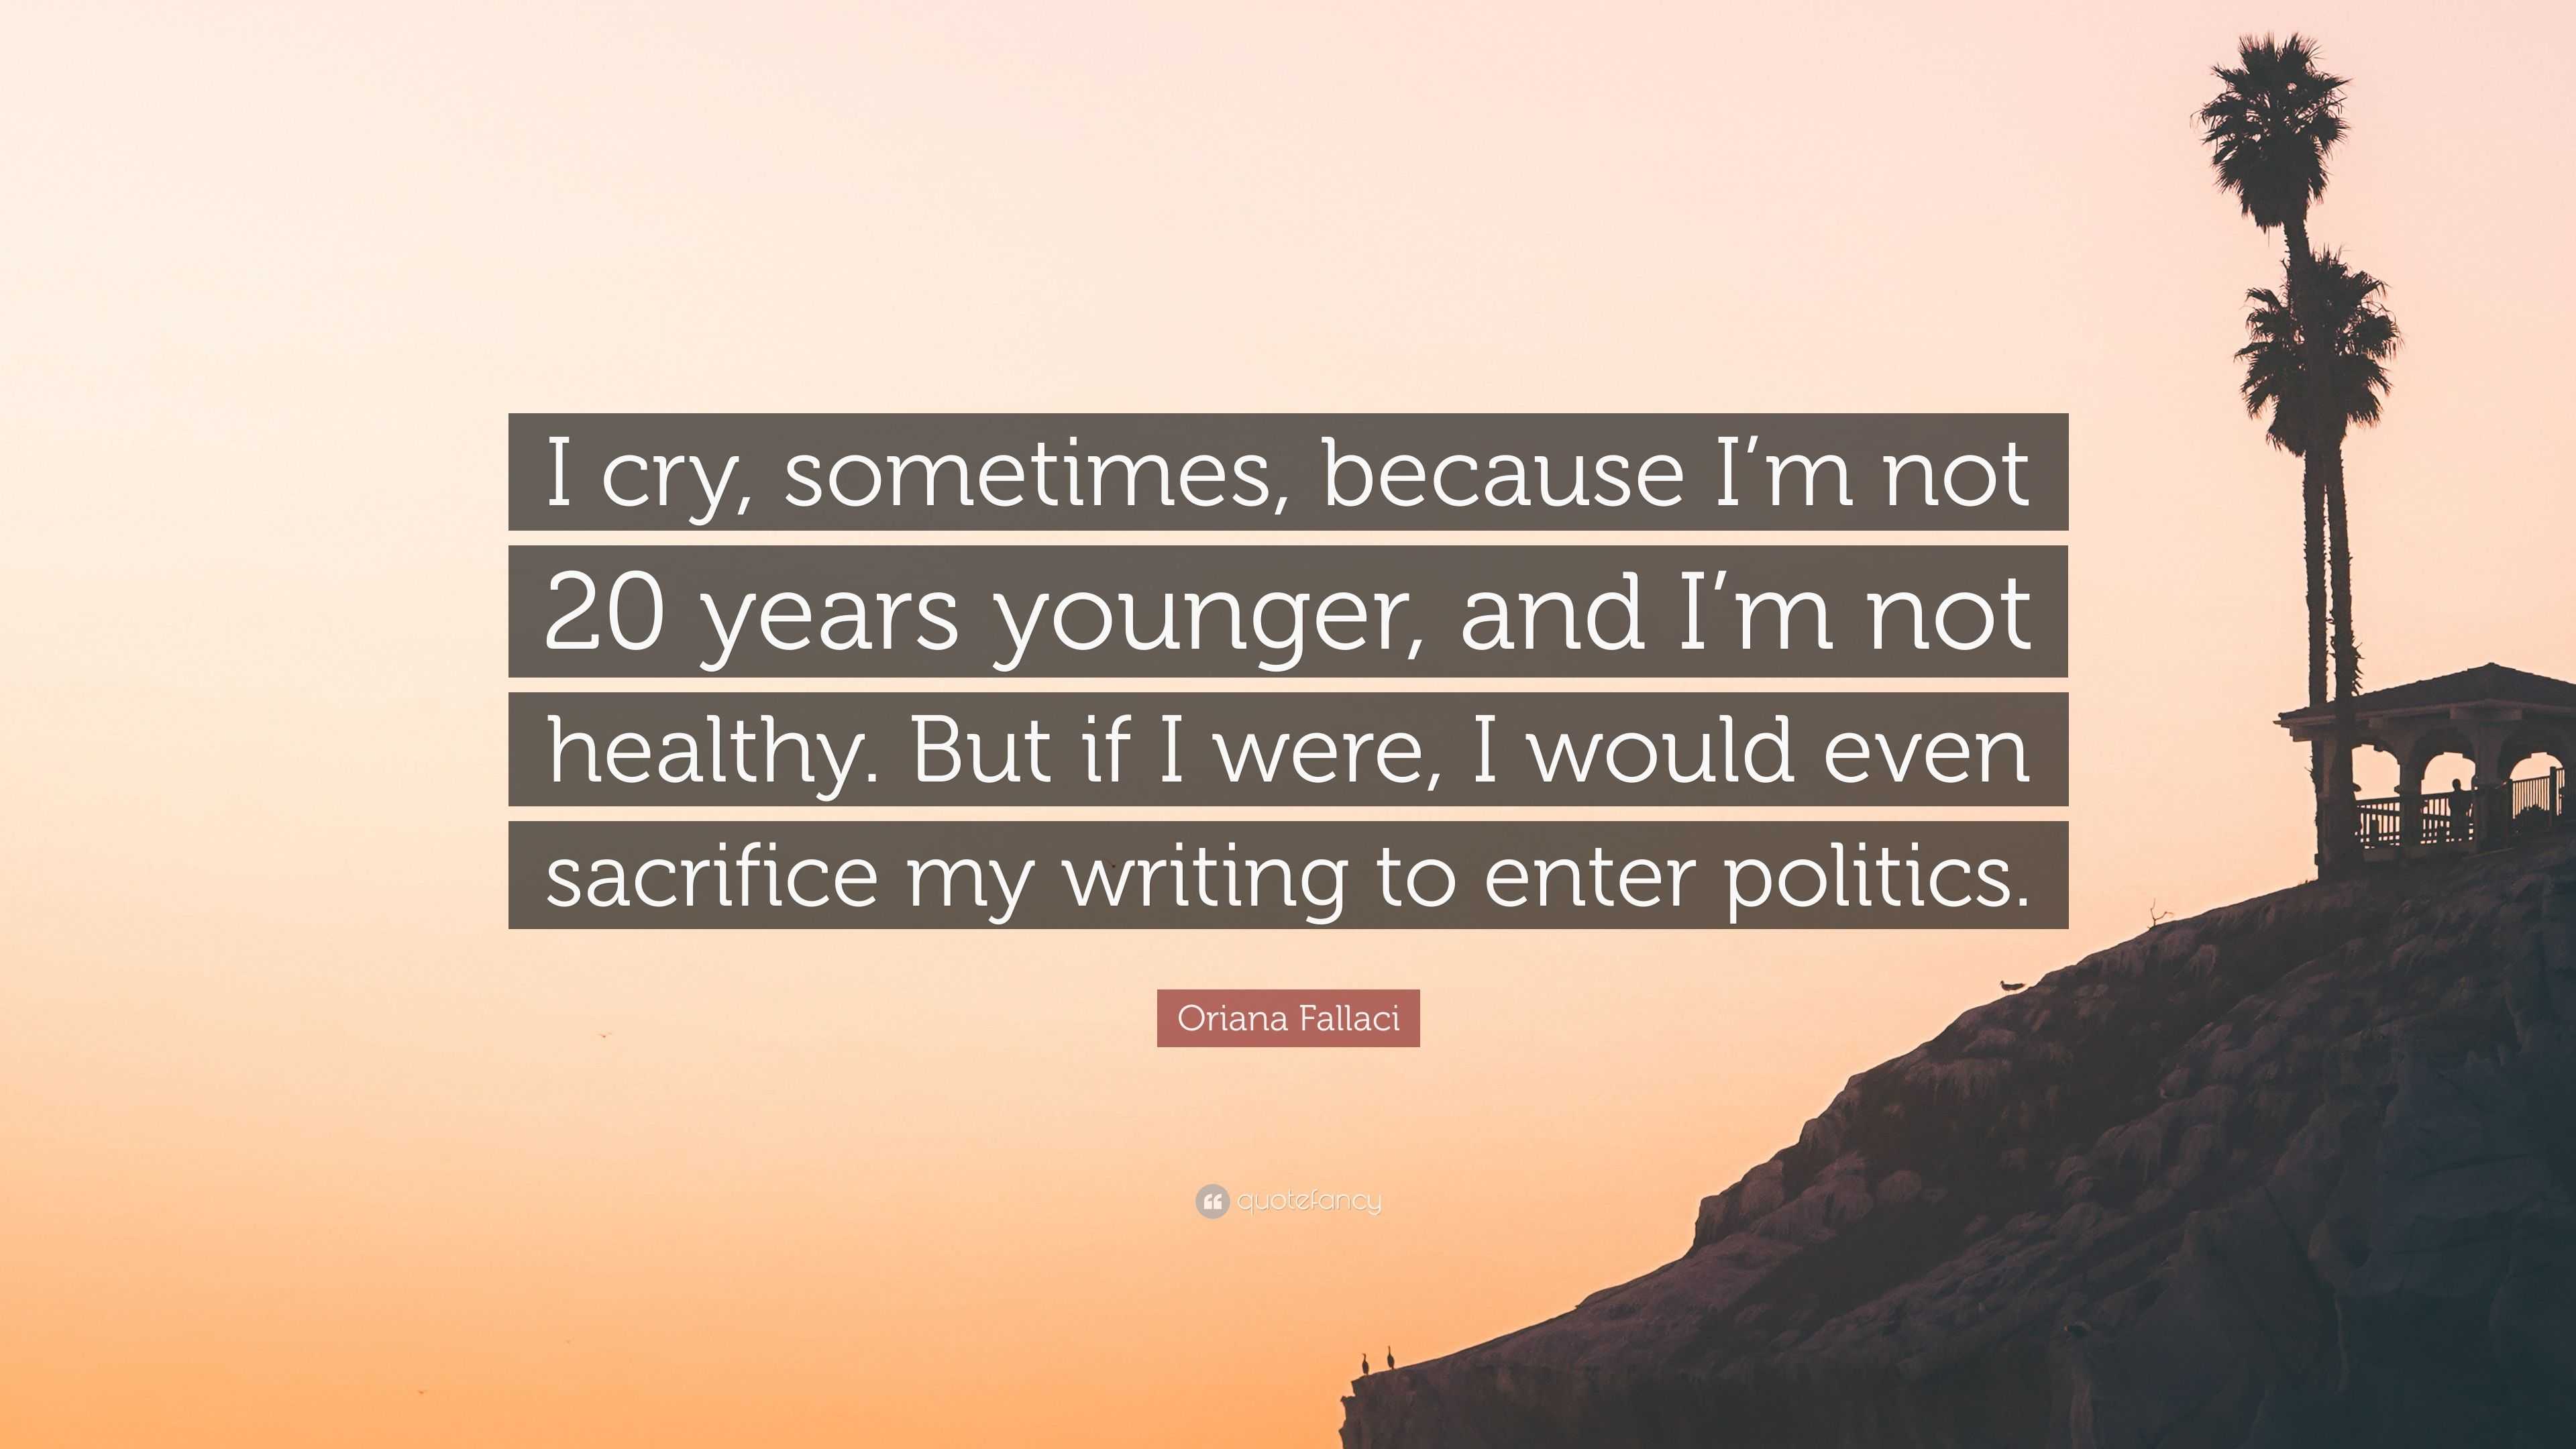 https://quotefancy.com/media/wallpaper/3840x2160/5150166-Oriana-Fallaci-Quote-I-cry-sometimes-because-I-m-not-20-years.jpg